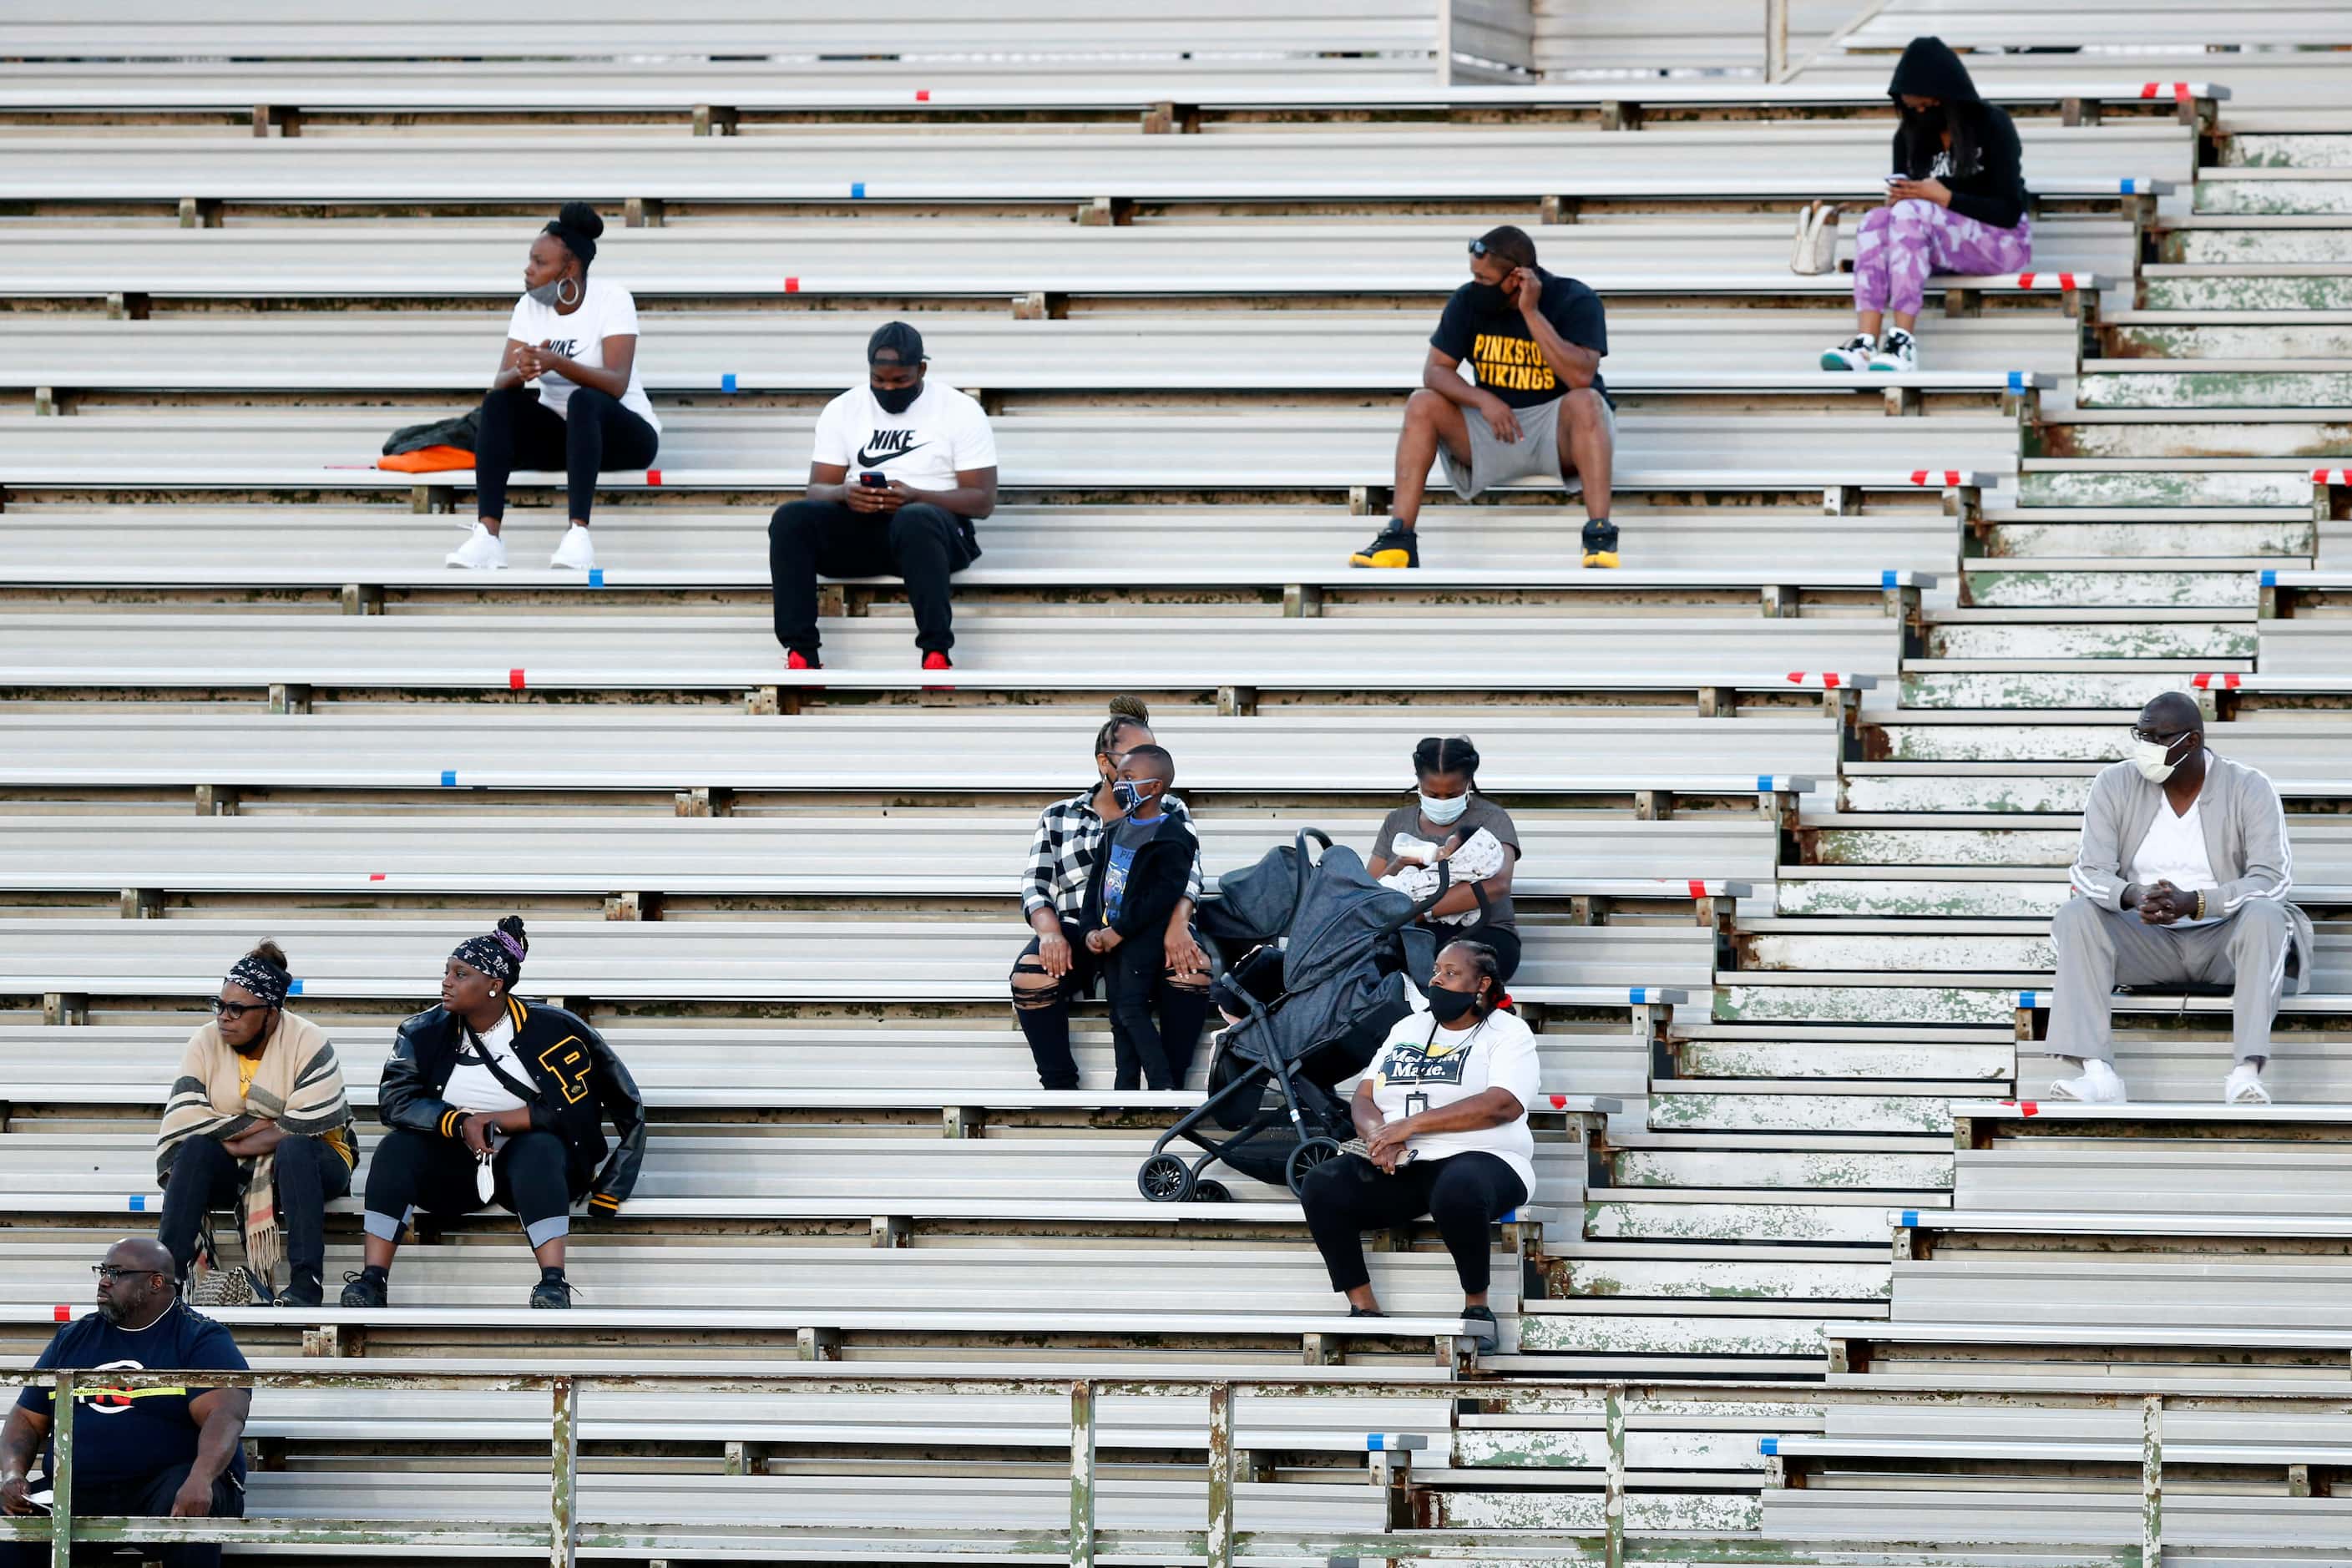 Thomas Jefferson and Pinkston football fans socially distance in the stands at Loos stadium...